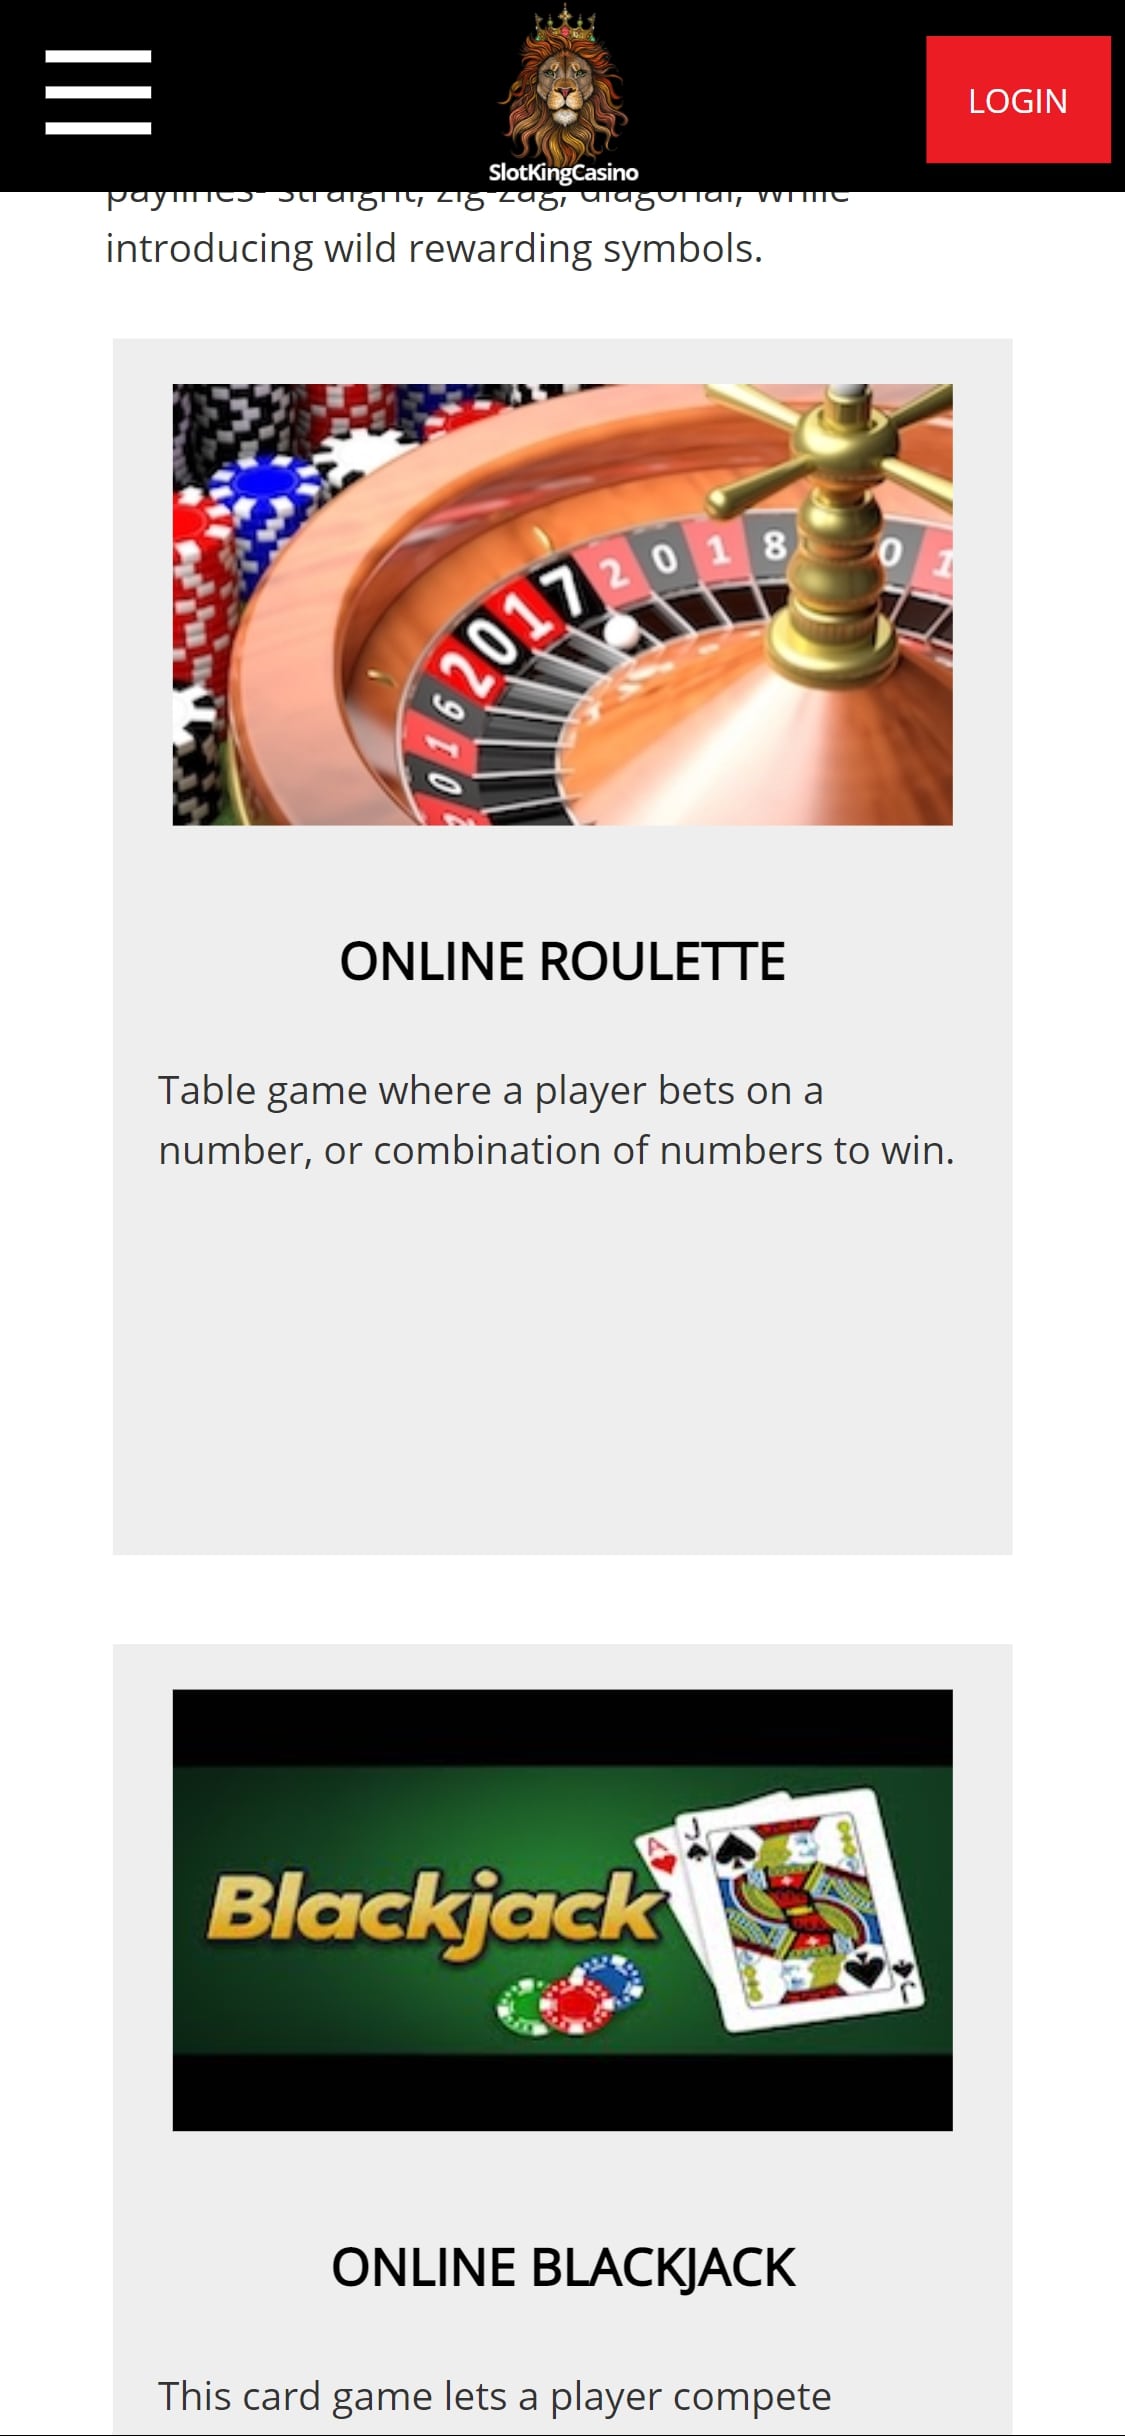 SlotKing Casino Mobile Live Dealer Games Review